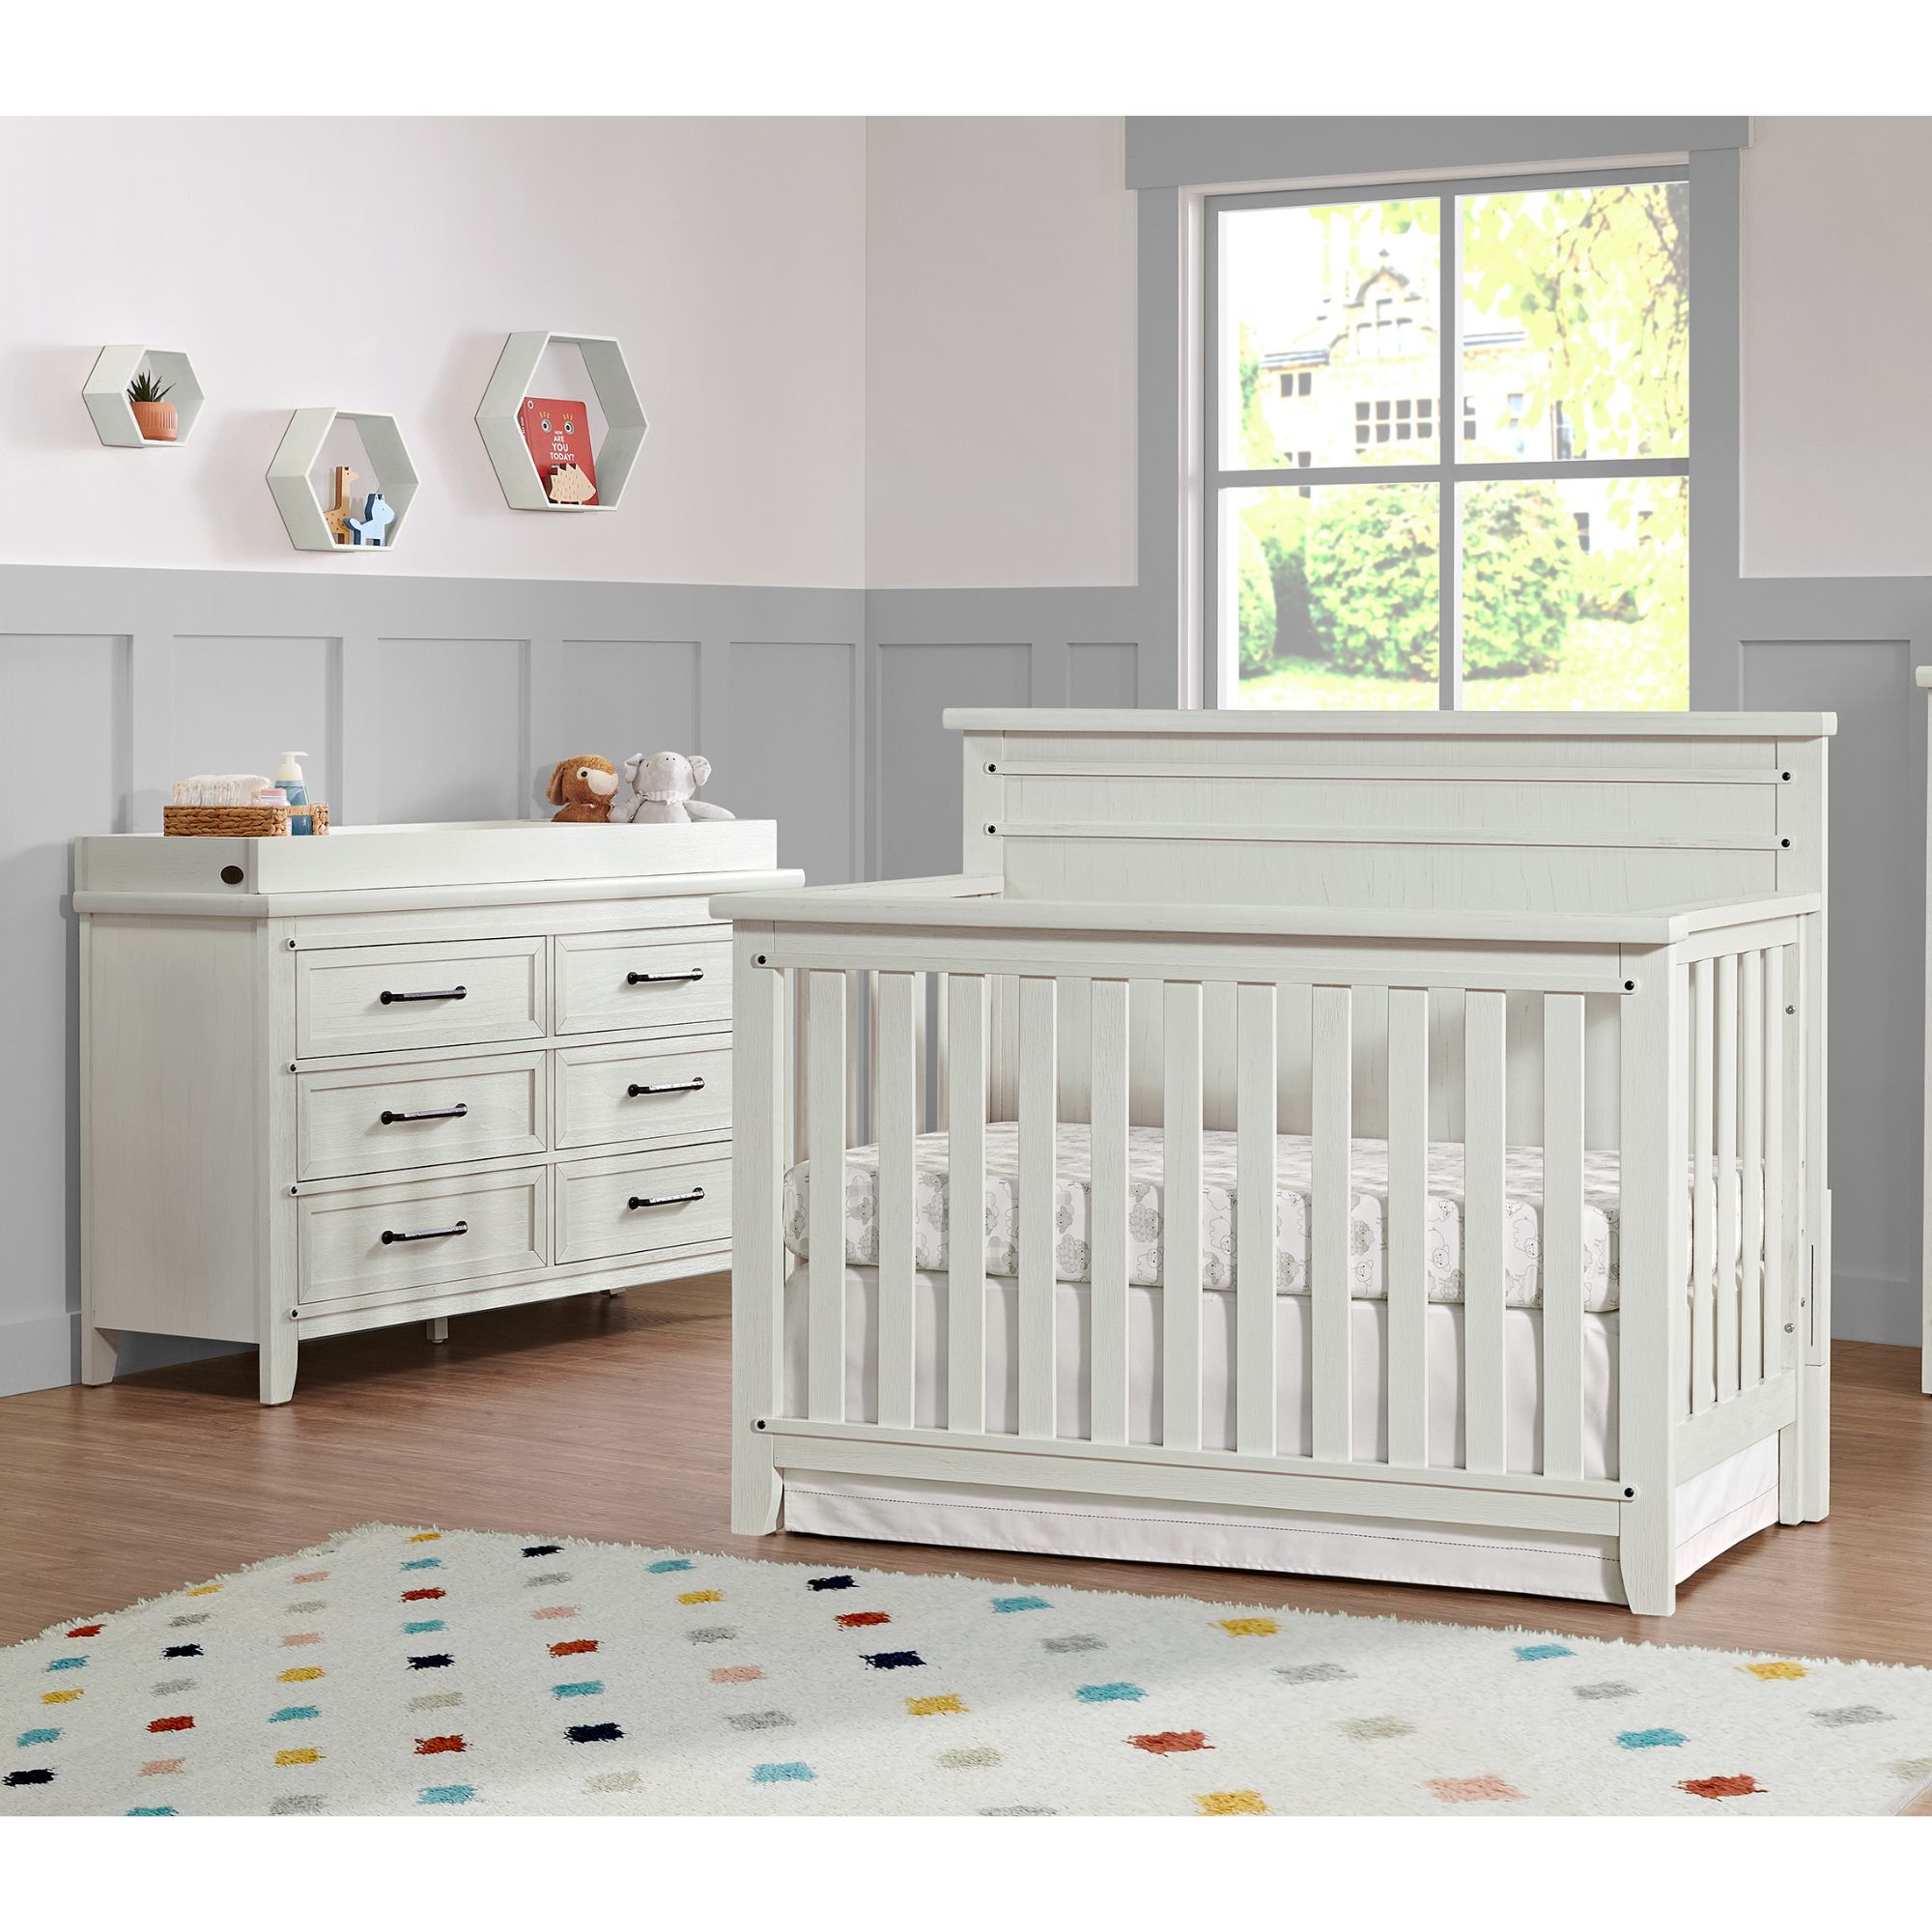 Soho Baby Morrison 4-in-1 Convertible Crib, Rustic White - image 2 of 2